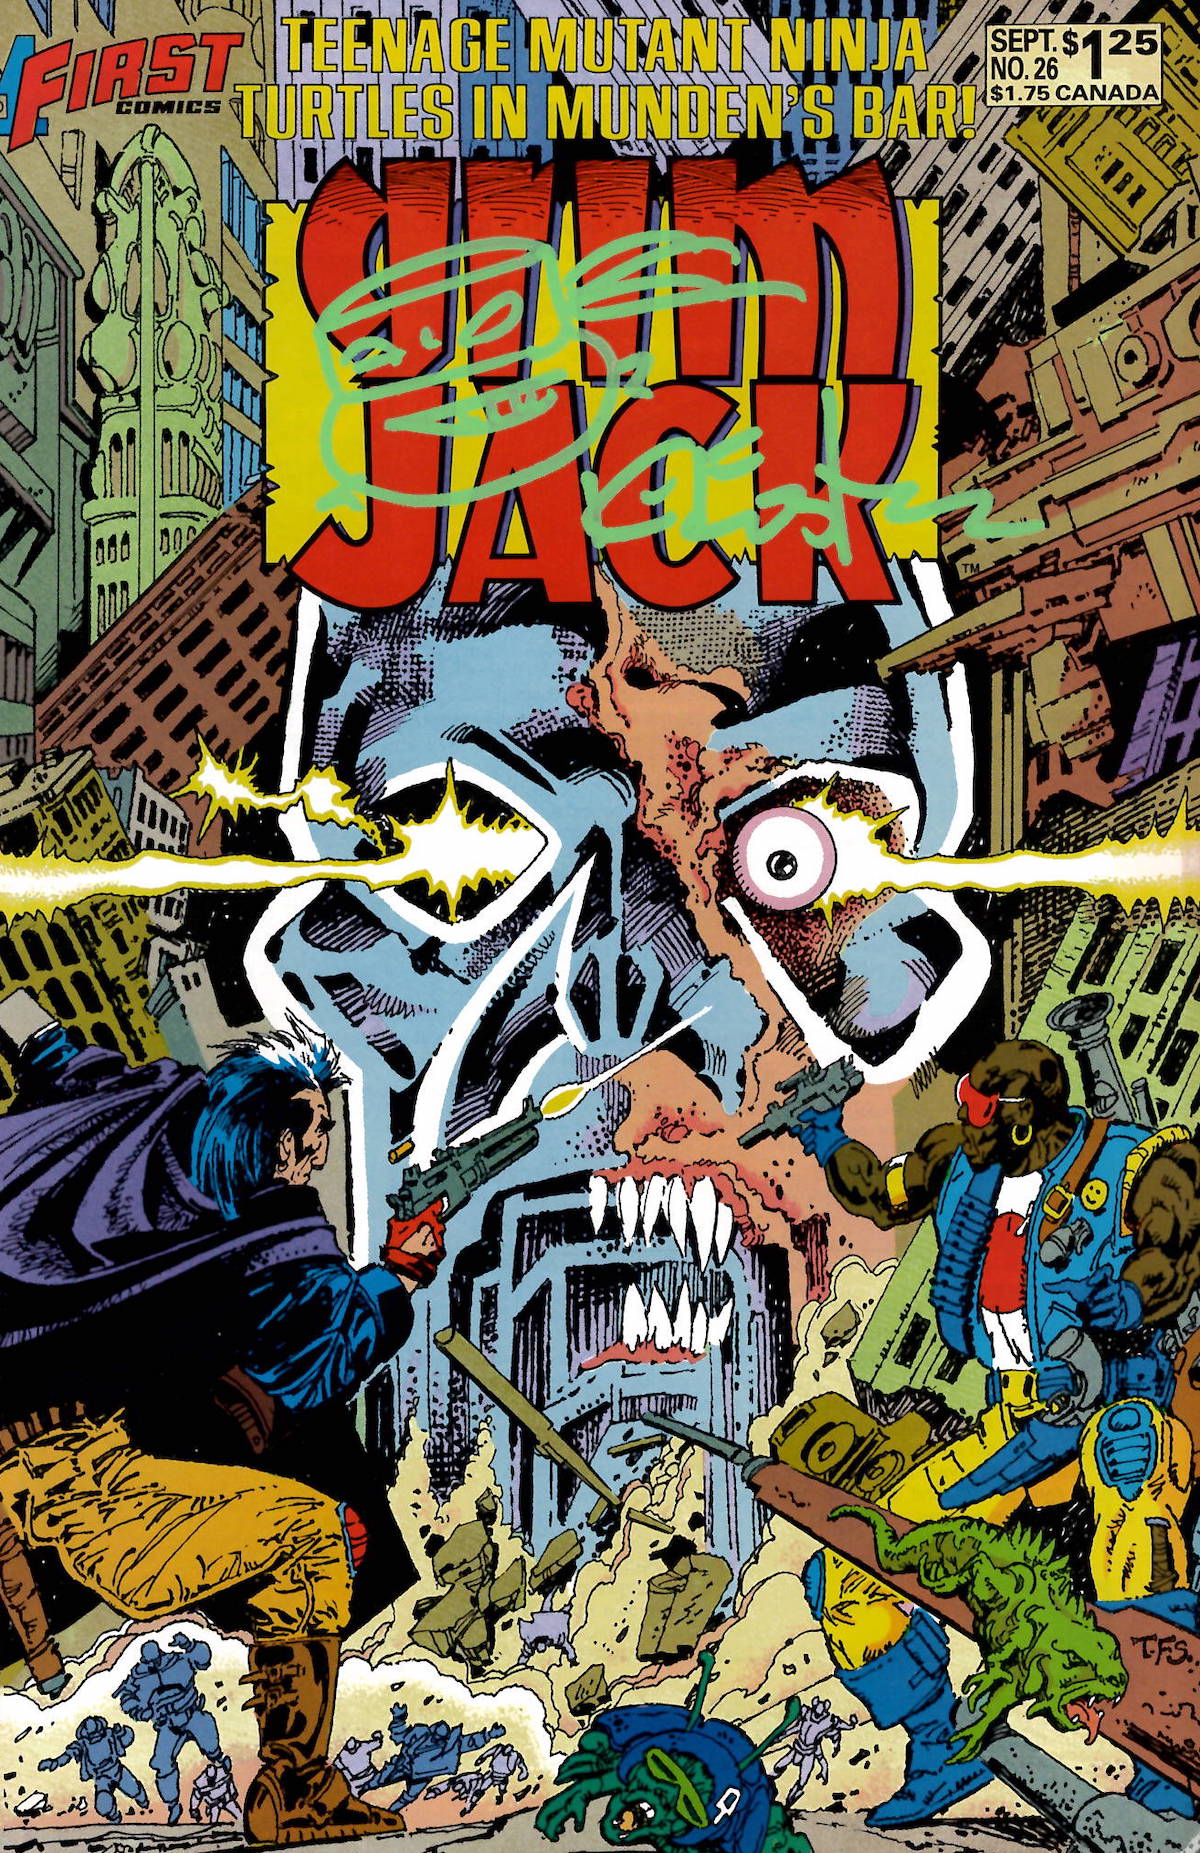 Grim Jack No. 26 – D’Ants Fever – TMNT Short Story – Signed with a headsketch remarque